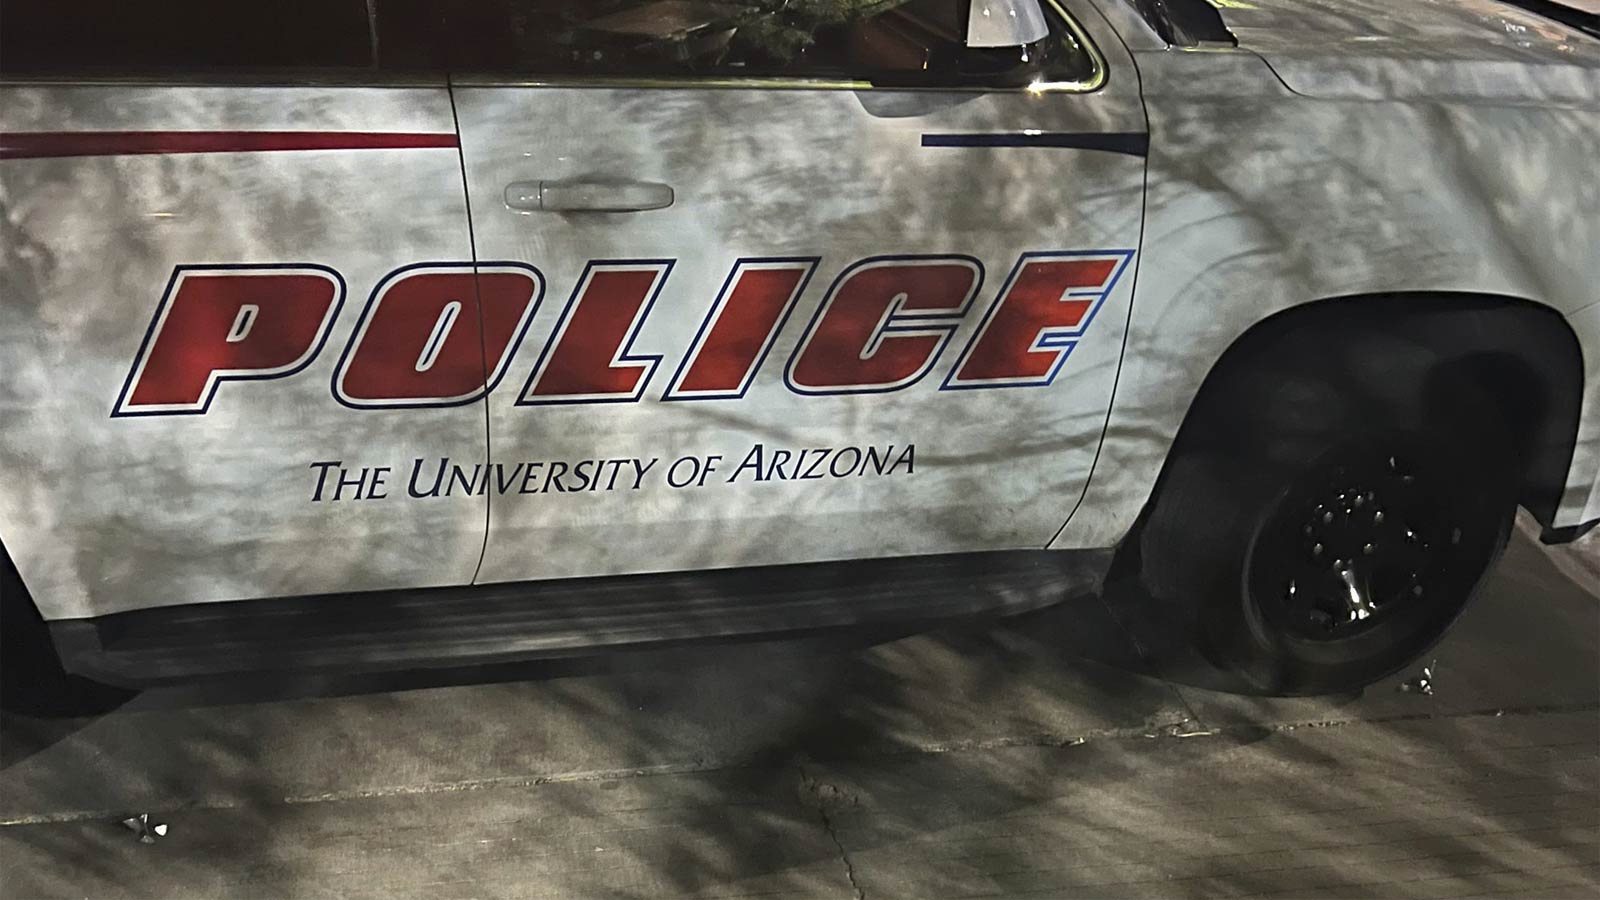 Spikes can be seen on the ground next to the front and back tires of a University of Arizona police...